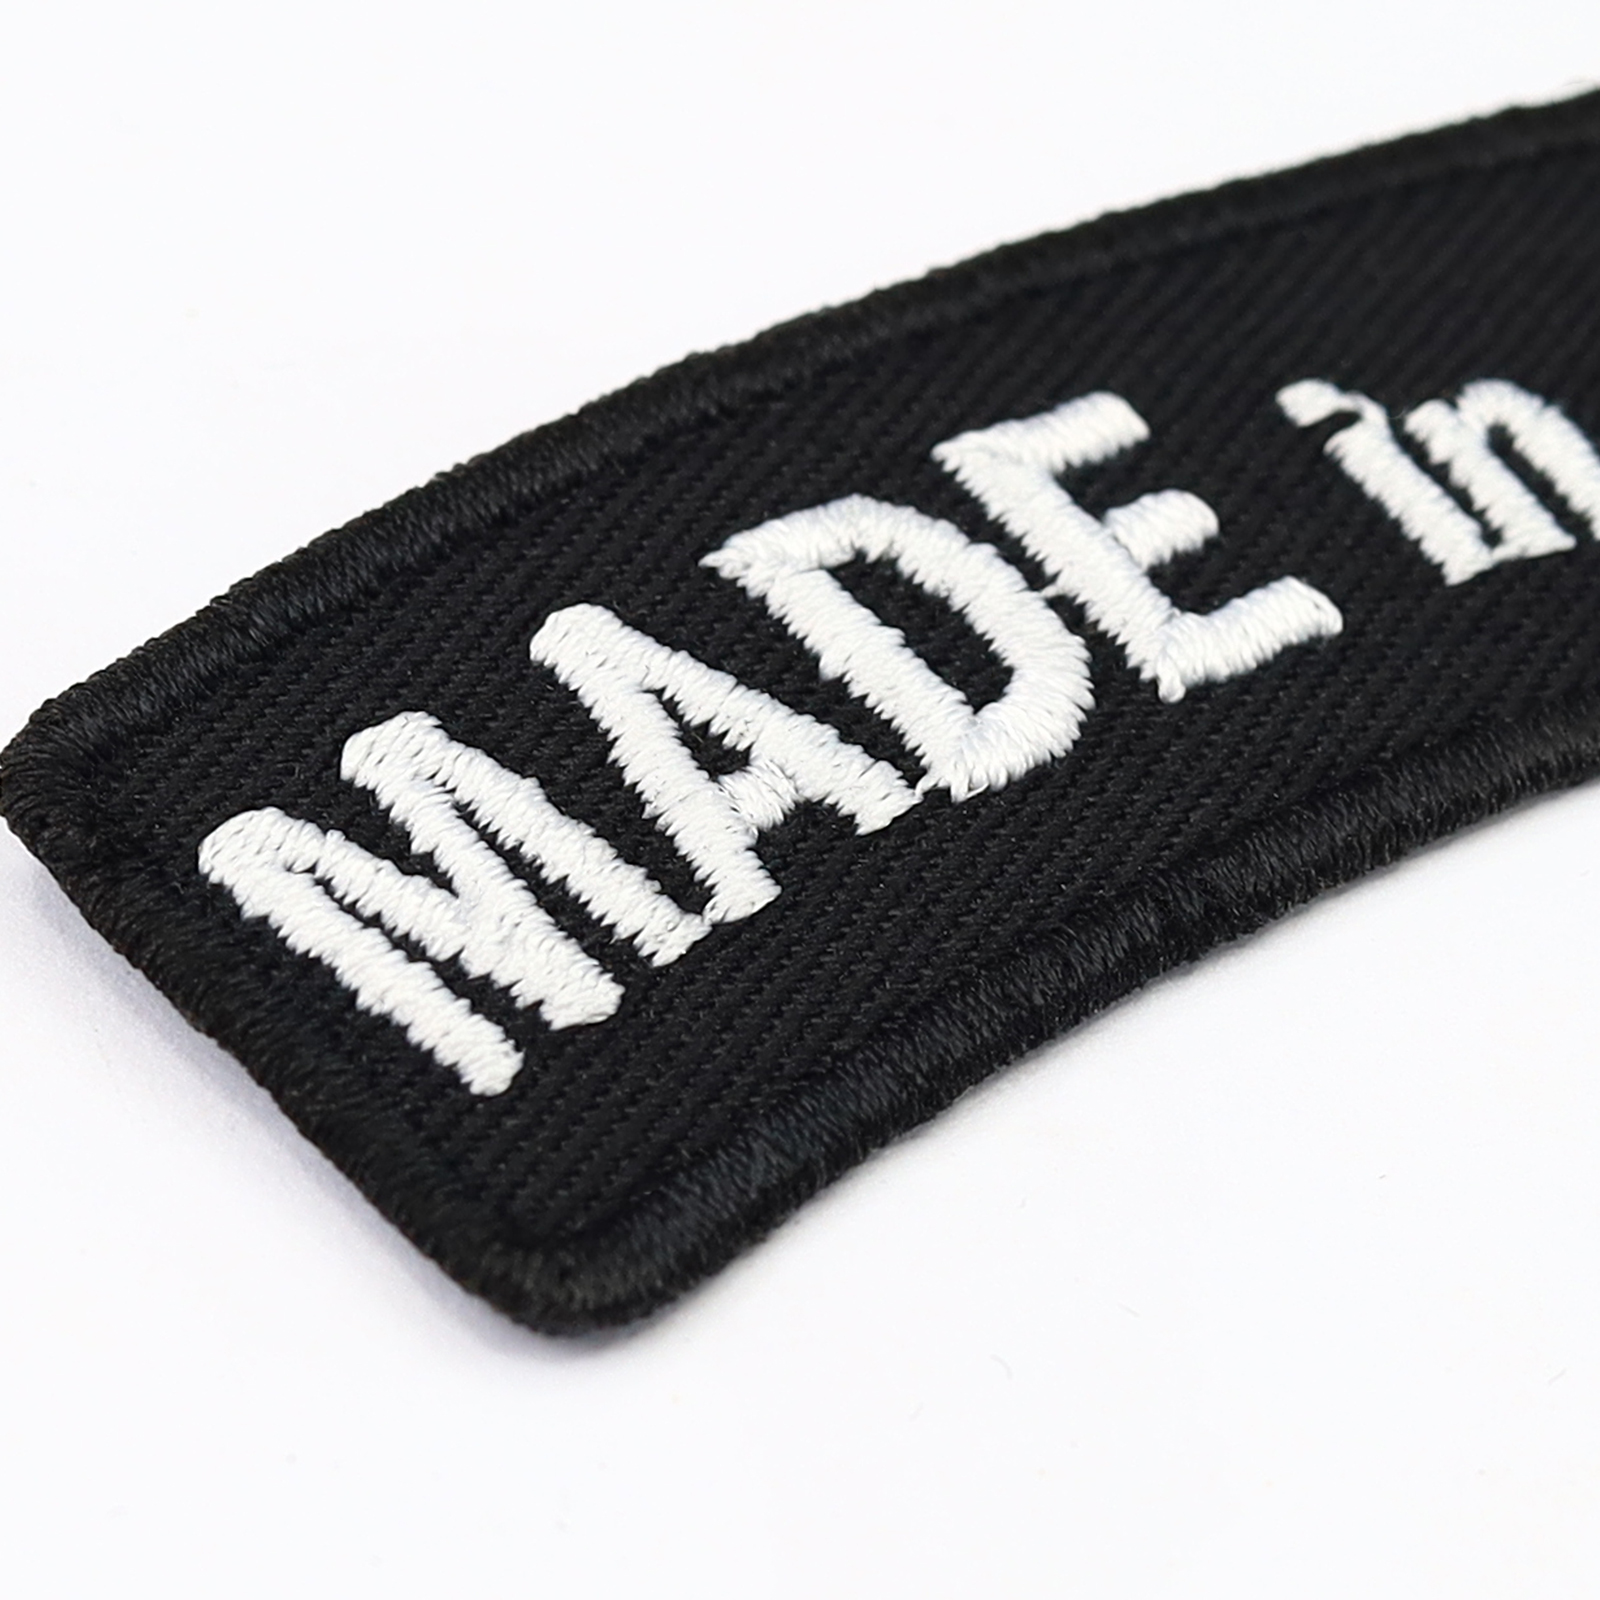 Made in the 70s - Patch